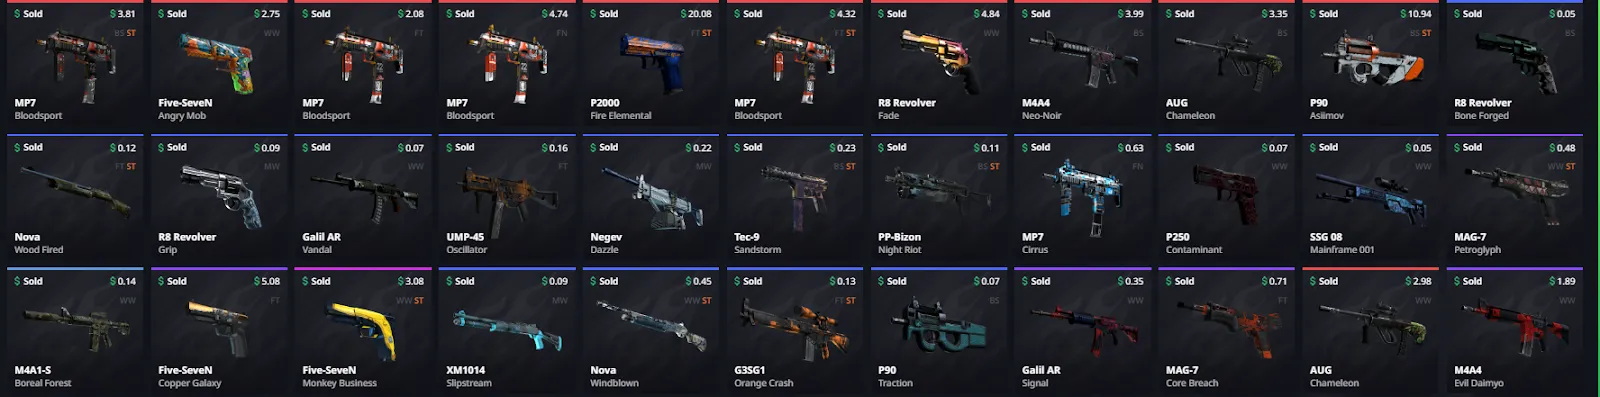 Hellcase Sell Skins